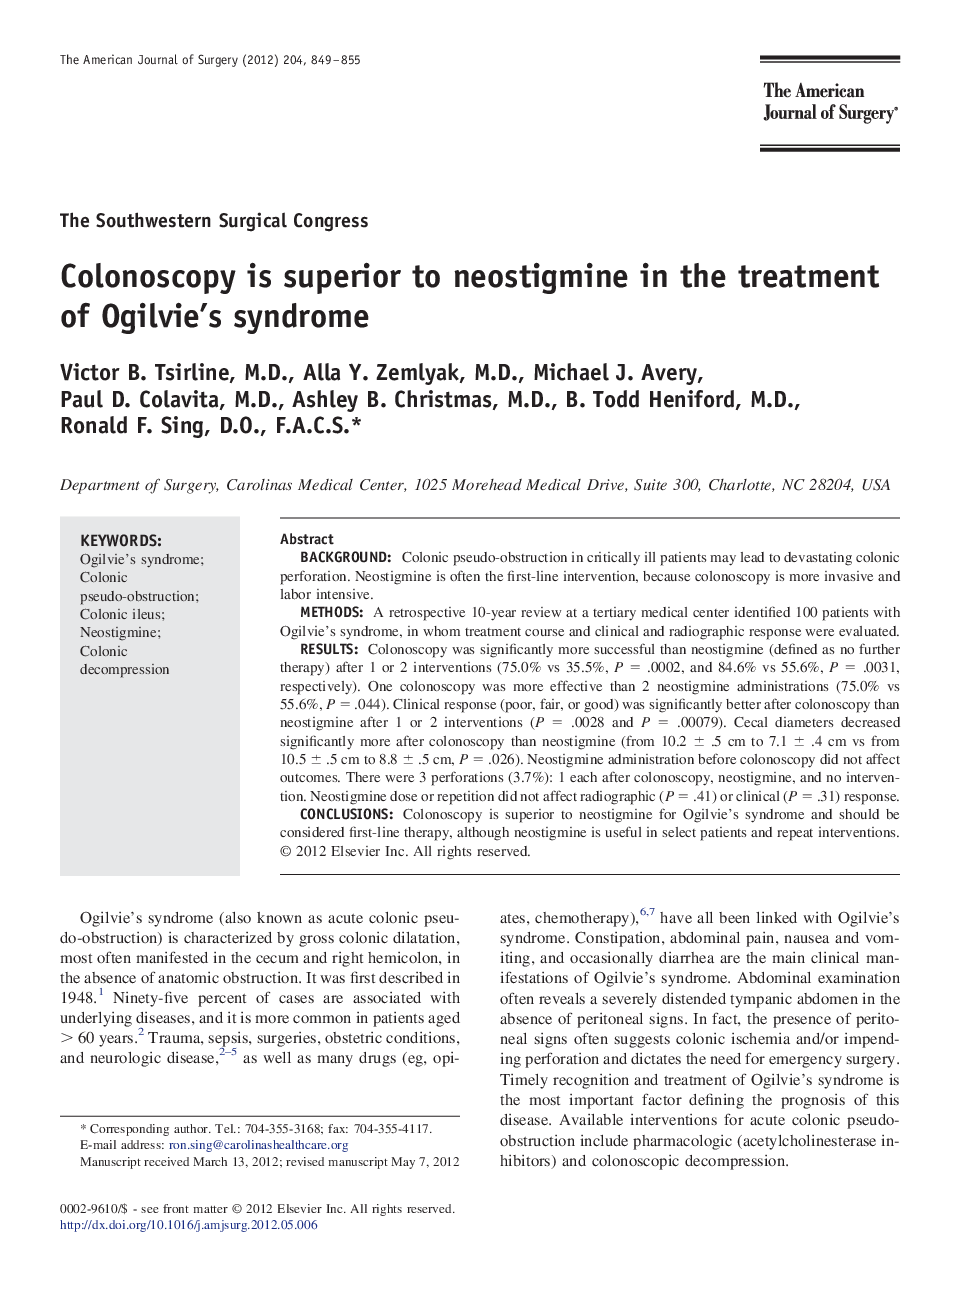 Colonoscopy is superior to neostigmine in the treatment of Ogilvie's syndrome